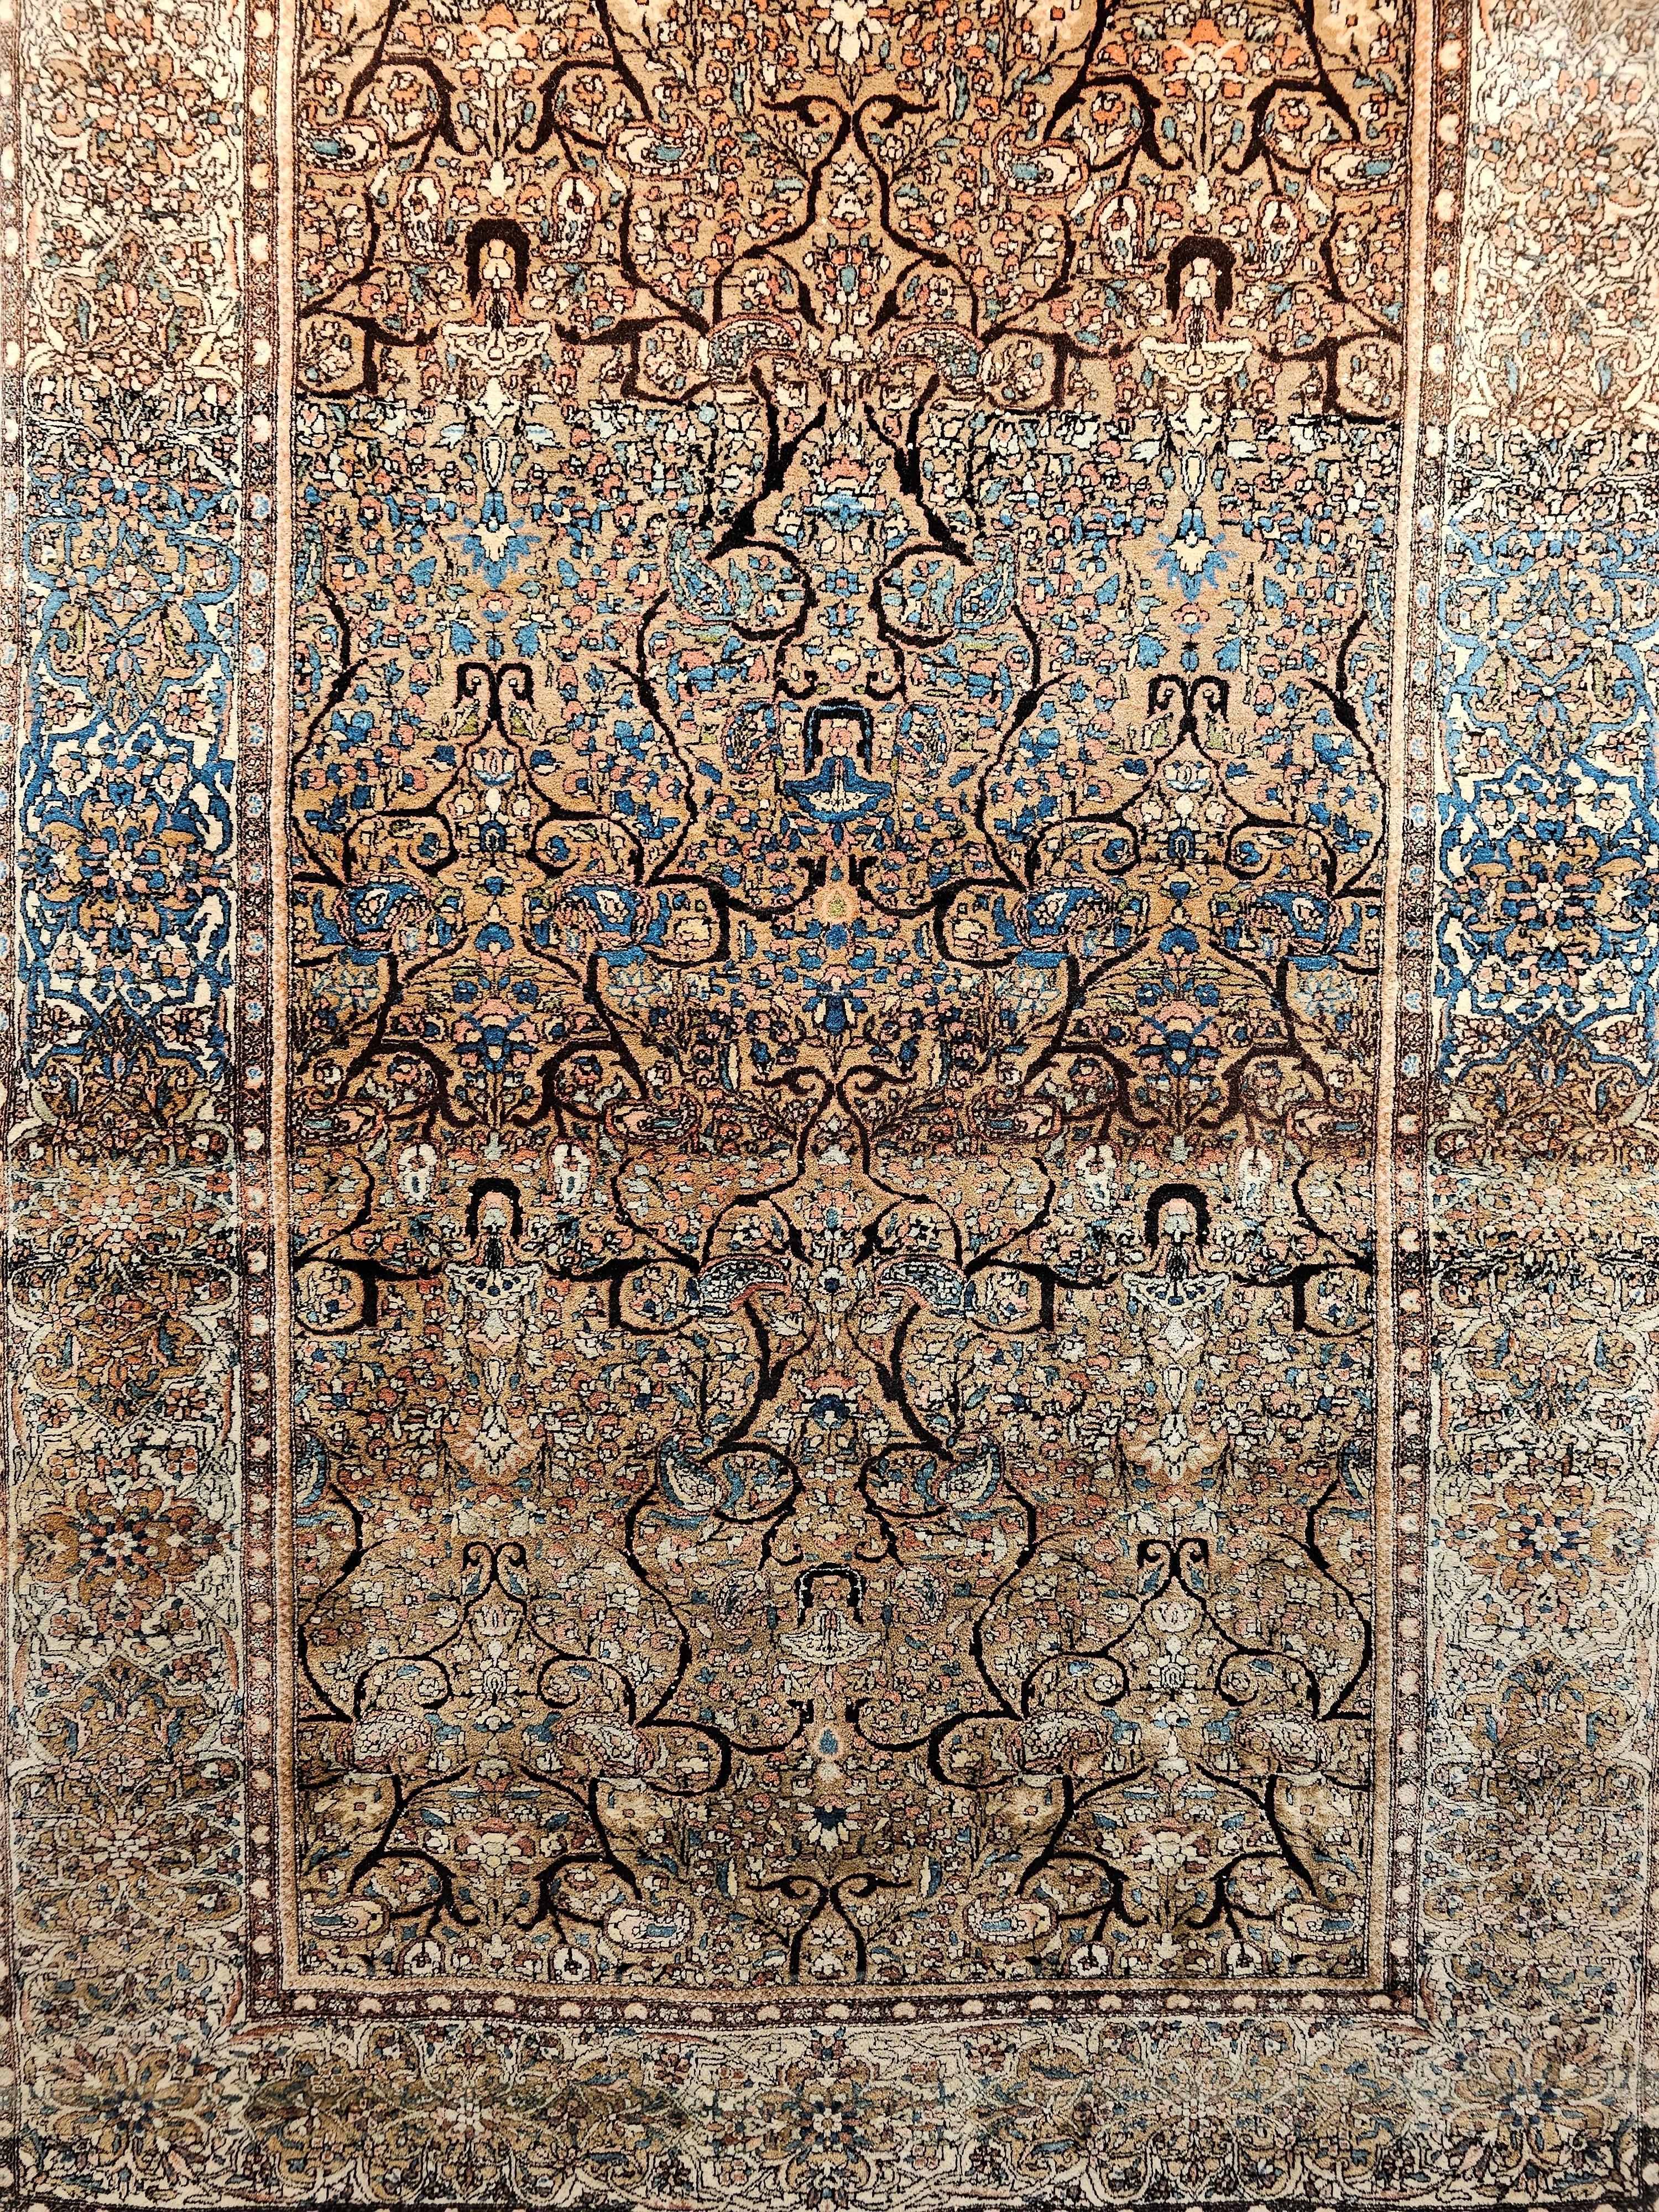 A Camelhair Persian Farahan Area Rug with an Allover Botanical Design from the Late 1800s. The rug has a camelhair field which contains an allover floral design with meandering branches in brown colors throughout. There is a beautiful abrash color,